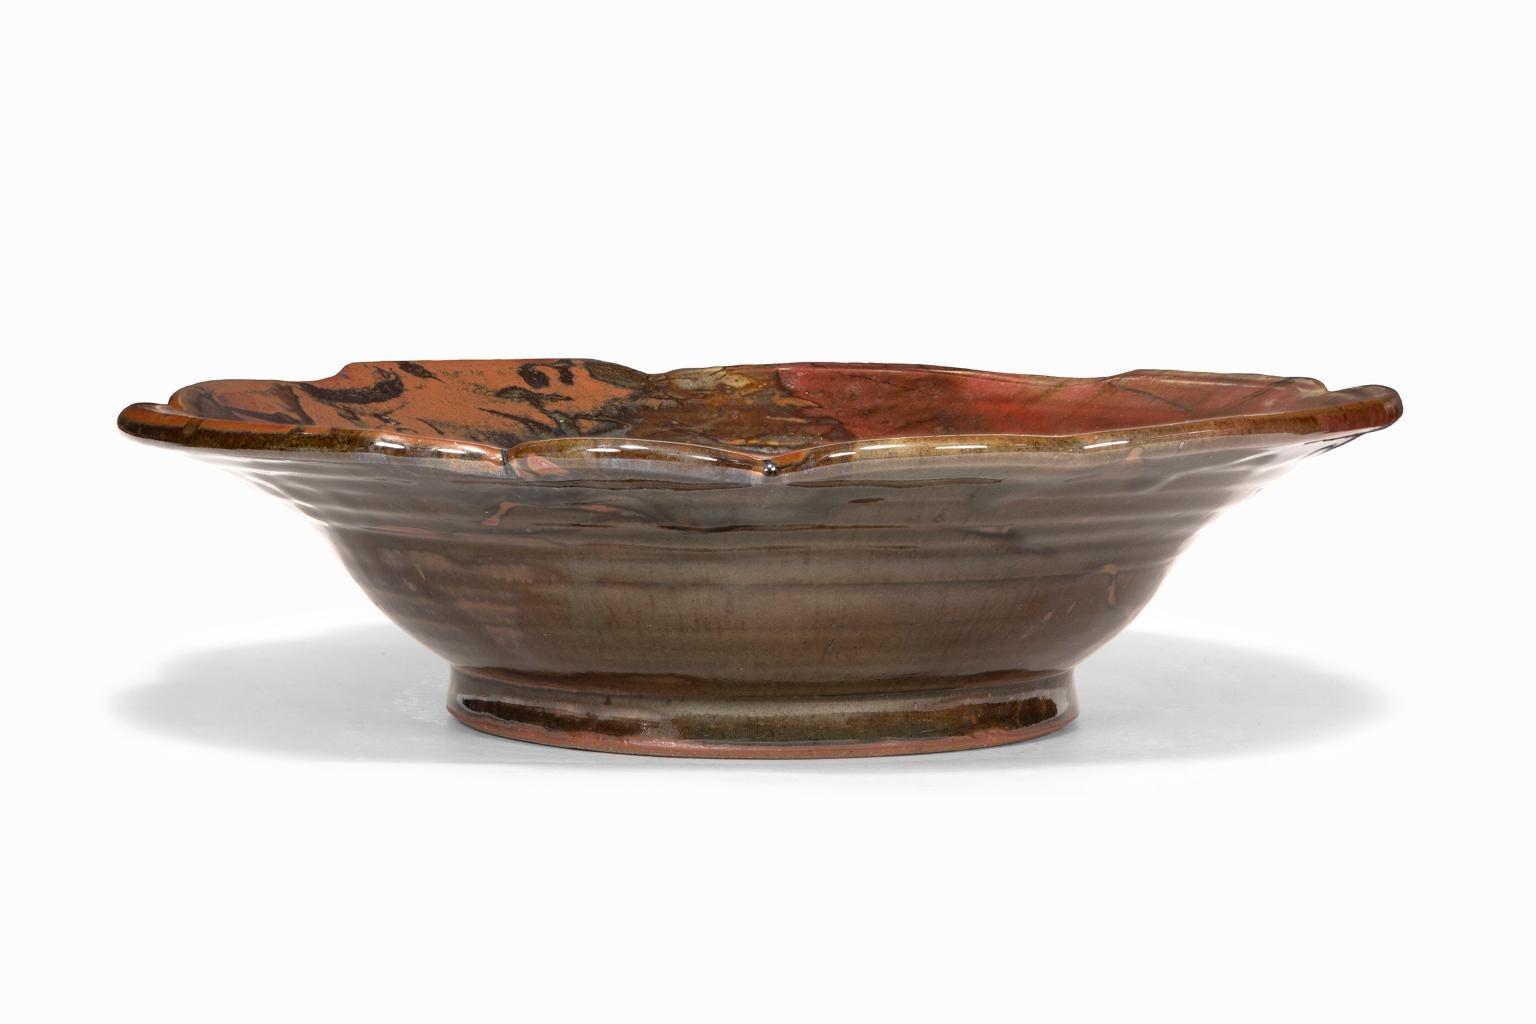 The ceramic bowl is an example of the kind of work by which John Glick became so famous. He was seduced by the effects of the reduction kiln, which decreased the levels of oxygen during firing, inducing the flame to pull oxygen out of the clay and